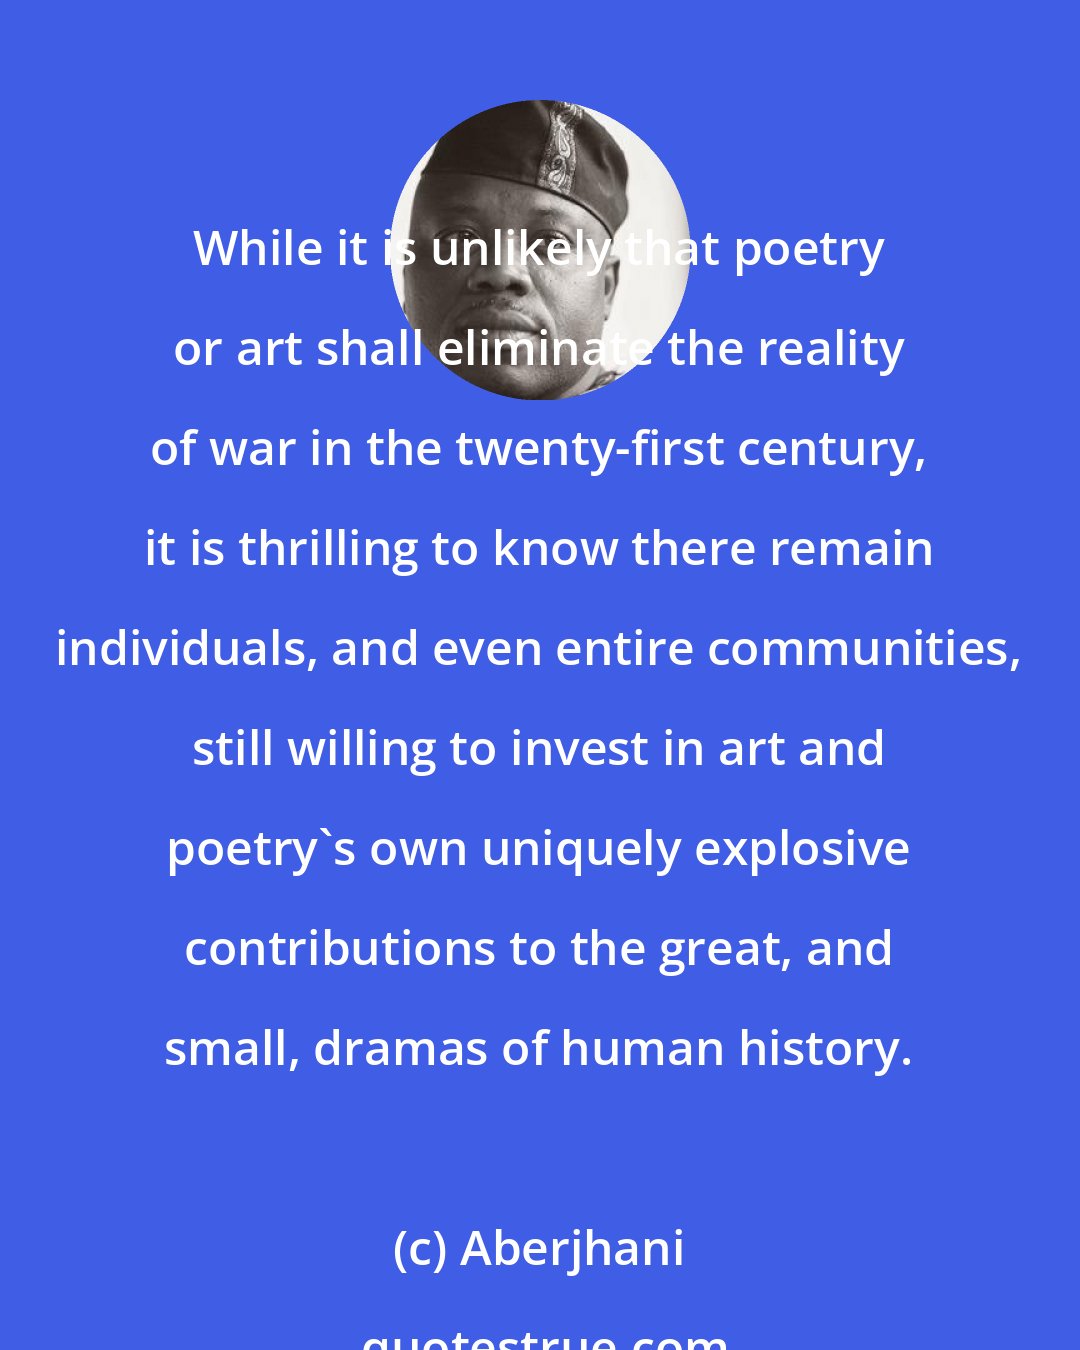 Aberjhani: While it is unlikely that poetry or art shall eliminate the reality of war in the twenty-first century, it is thrilling to know there remain individuals, and even entire communities, still willing to invest in art and poetry's own uniquely explosive contributions to the great, and small, dramas of human history.